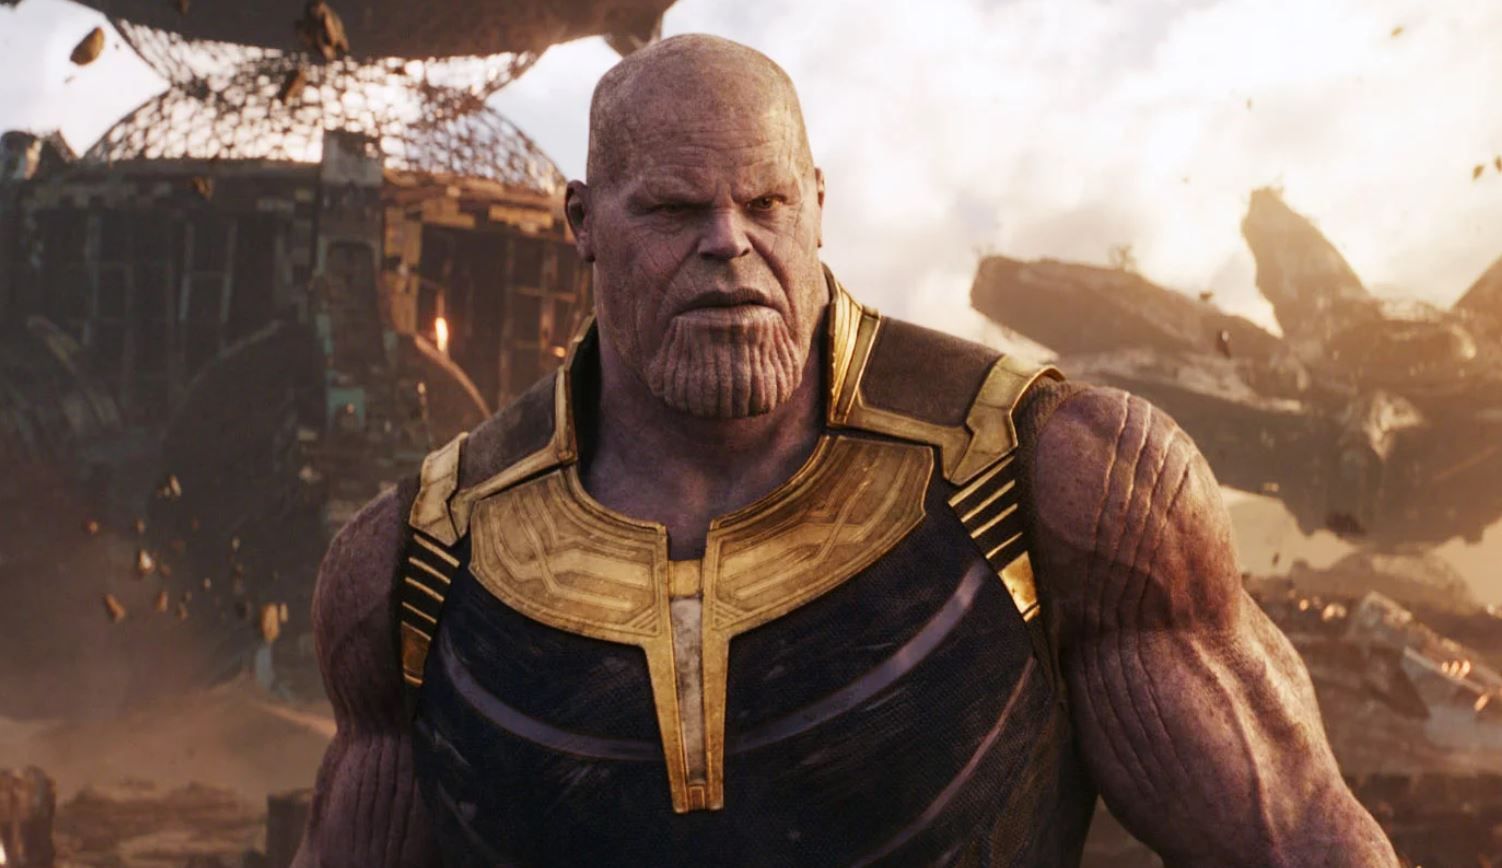 Avengers: Endgame' Toy Leak Reveals Good Look At Thanos' New Weapon